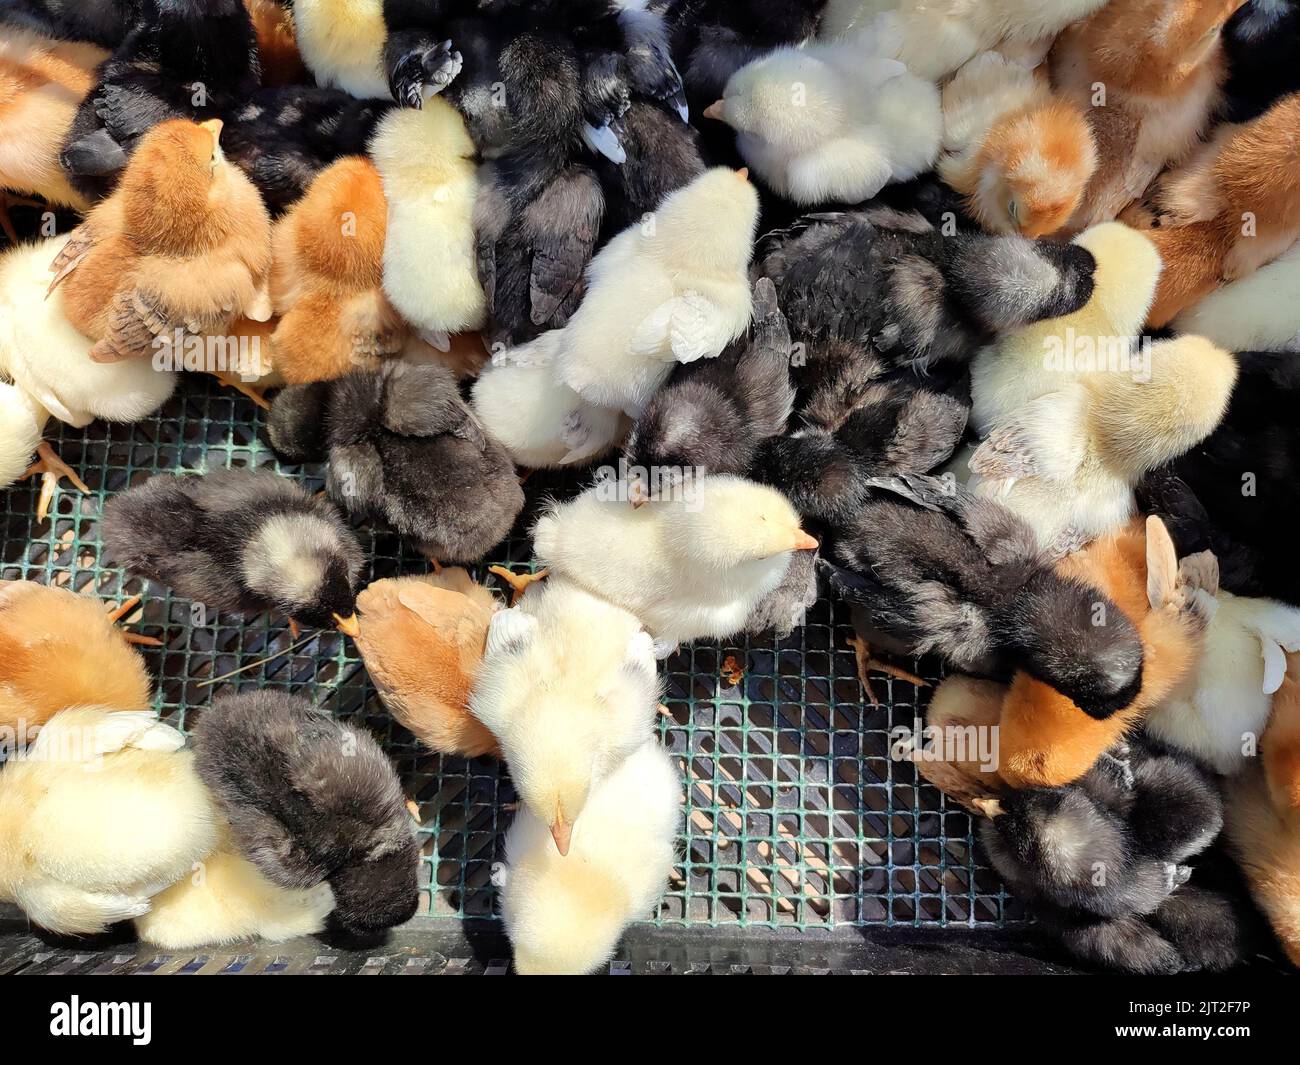 Many little yellow, black, gray young chickens on farm close-up. Many hen chickens top view. Livestock, agribusiness, domestic pet, aviculture breeding, industrial production. Agricultural background Stock Photo